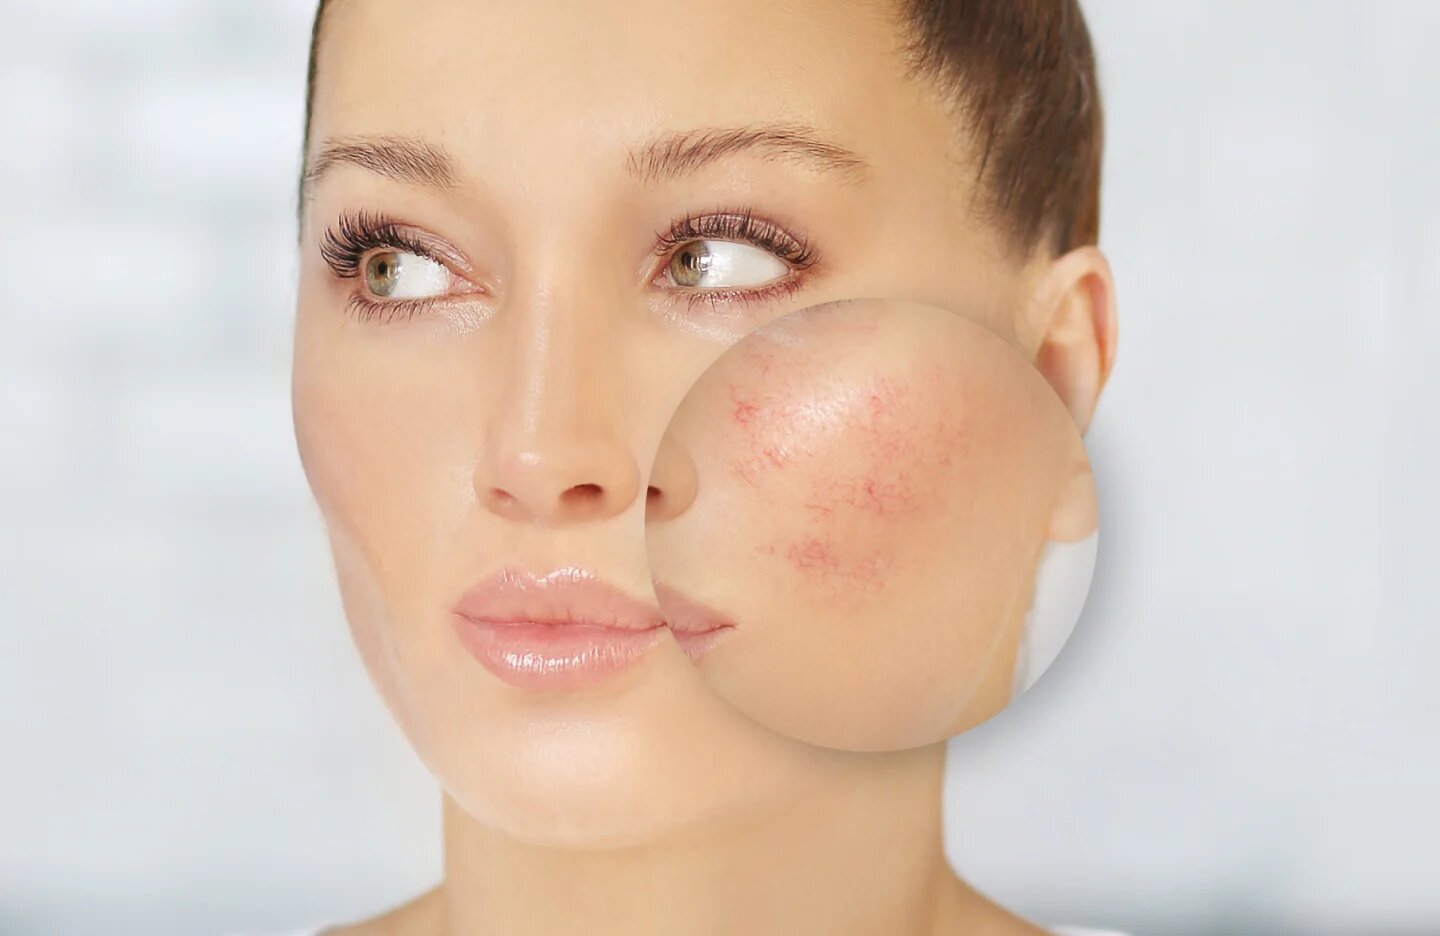 How to Manage the Symptoms of Rosacea